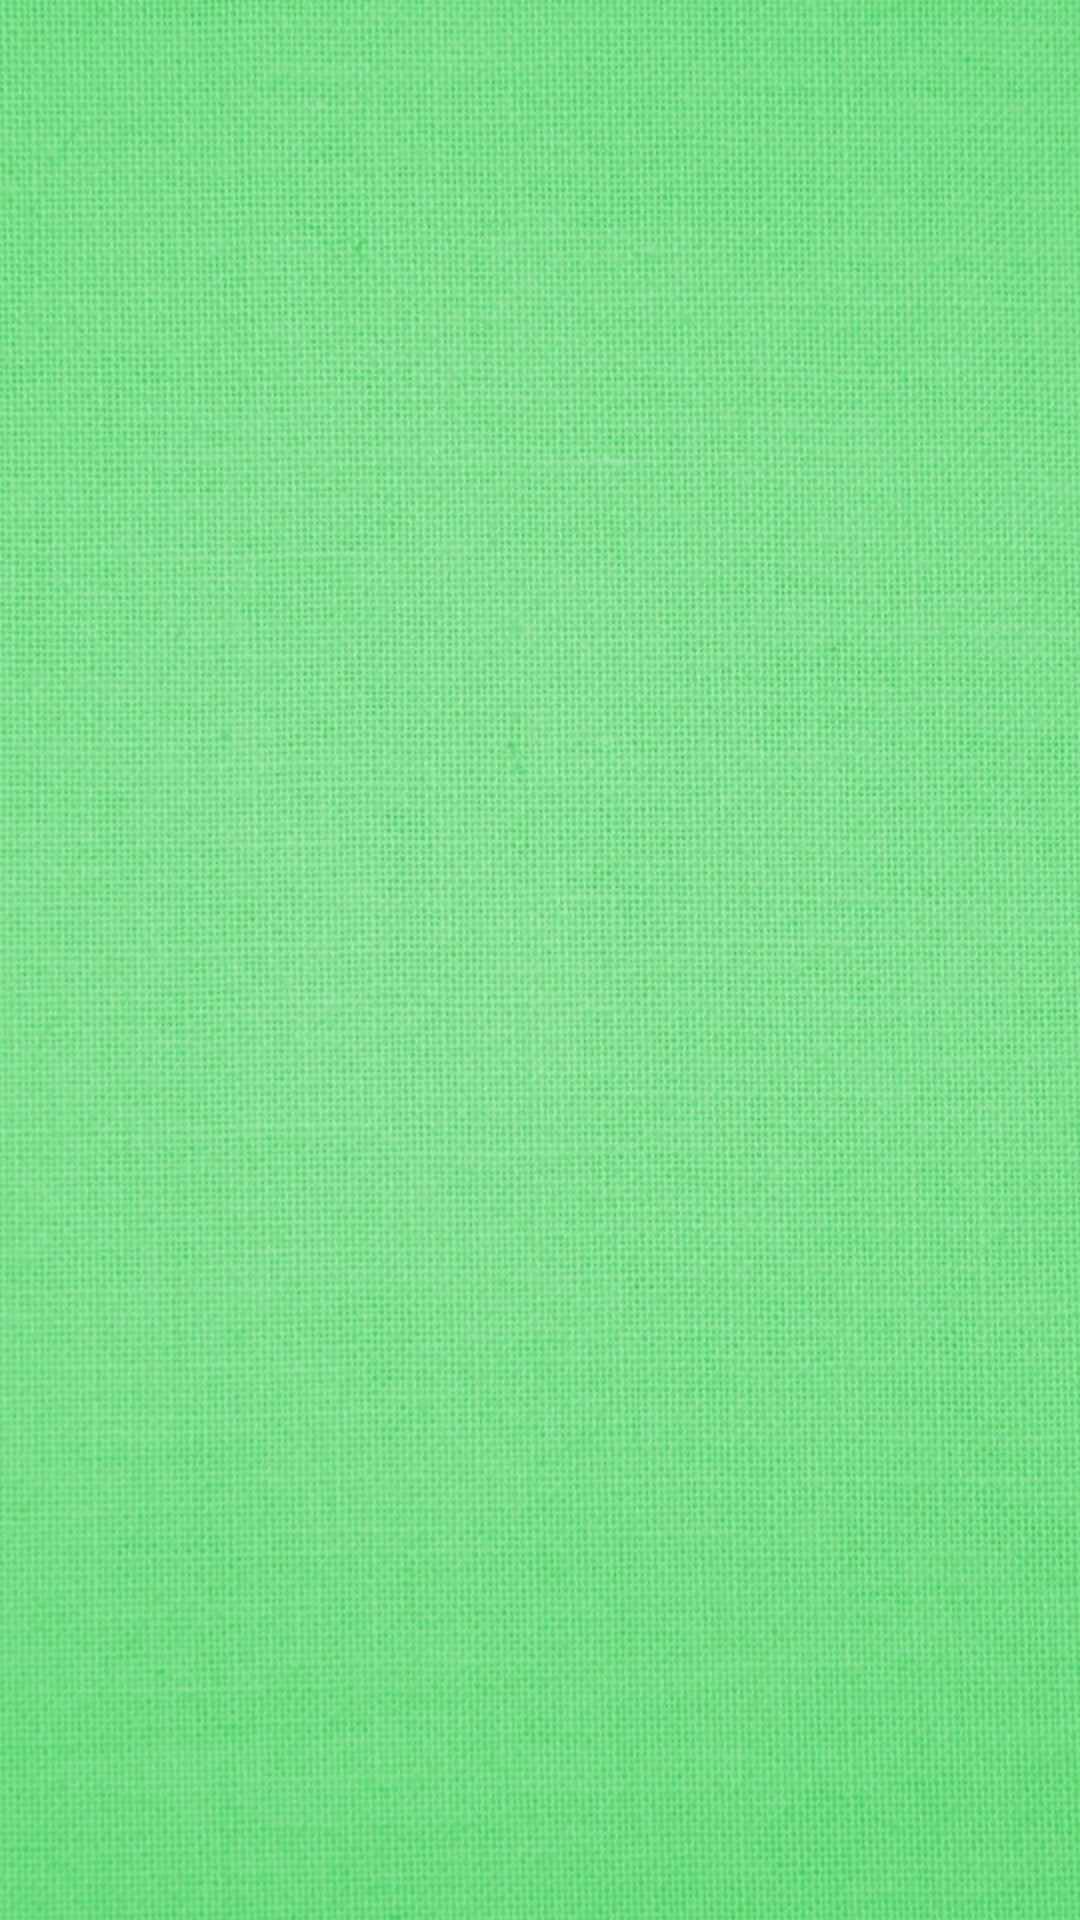 Mint Green iPhone 7 Wallpaper with image resolution 1080x1920 pixel. You can use this wallpaper as background for your desktop Computer Screensavers, Android or iPhone smartphones